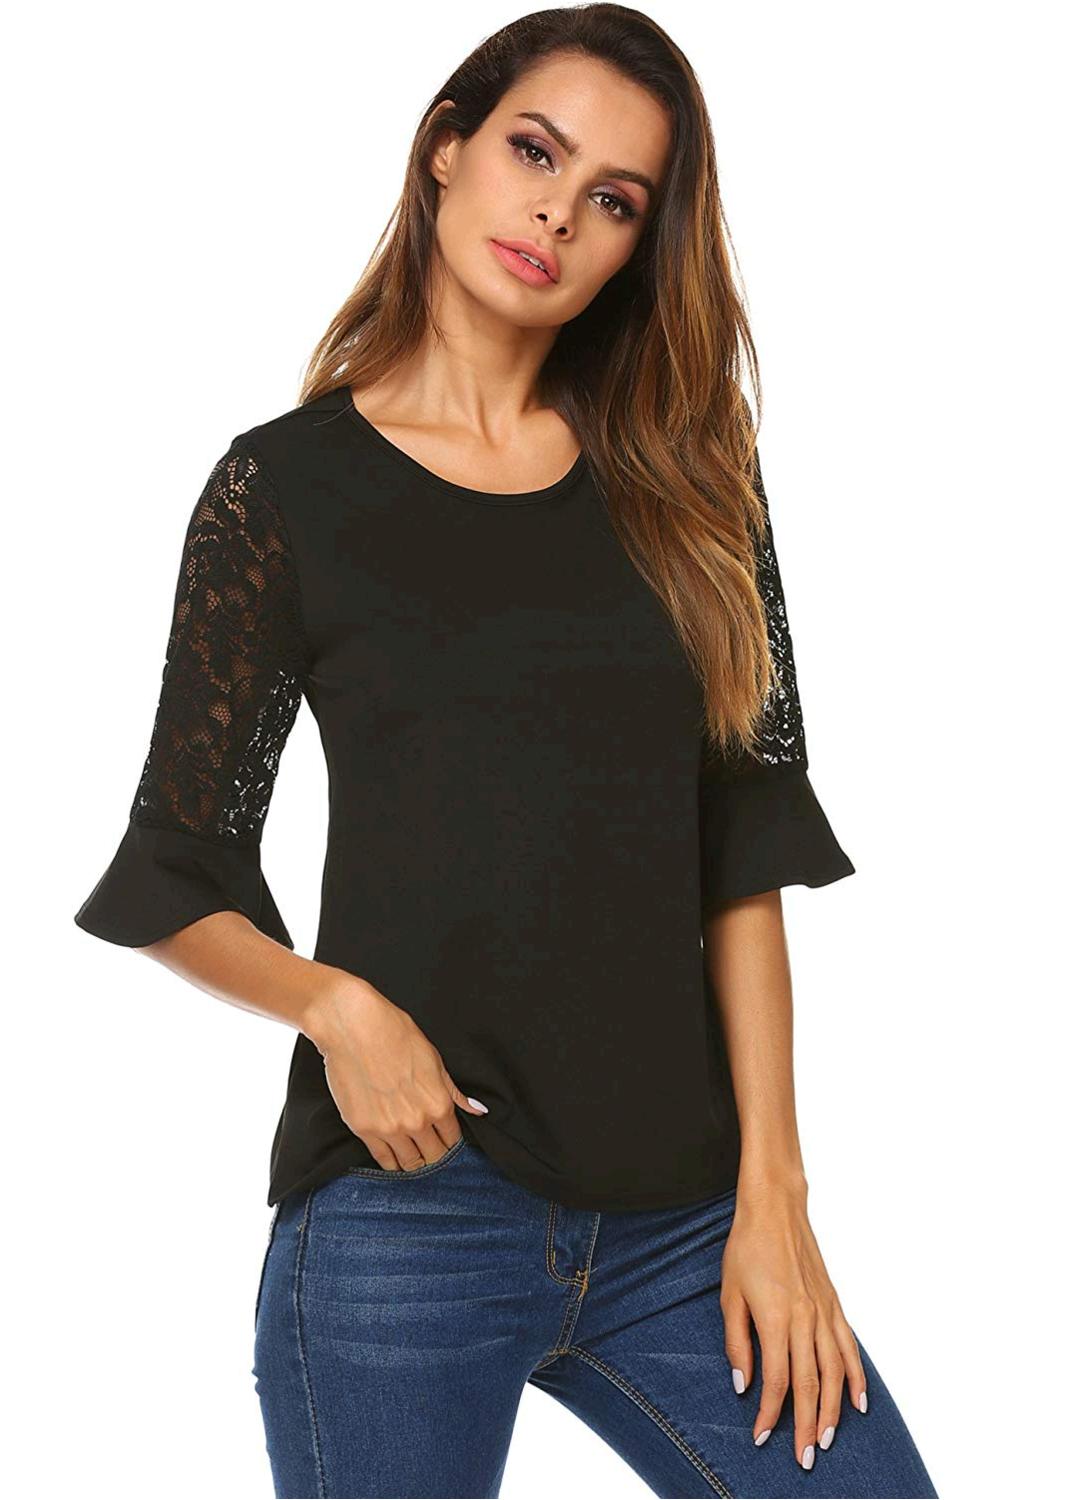 Women's Round Neck 3/4 Bell Sleeve Solid Blouse Top T-Shirt, Black ...